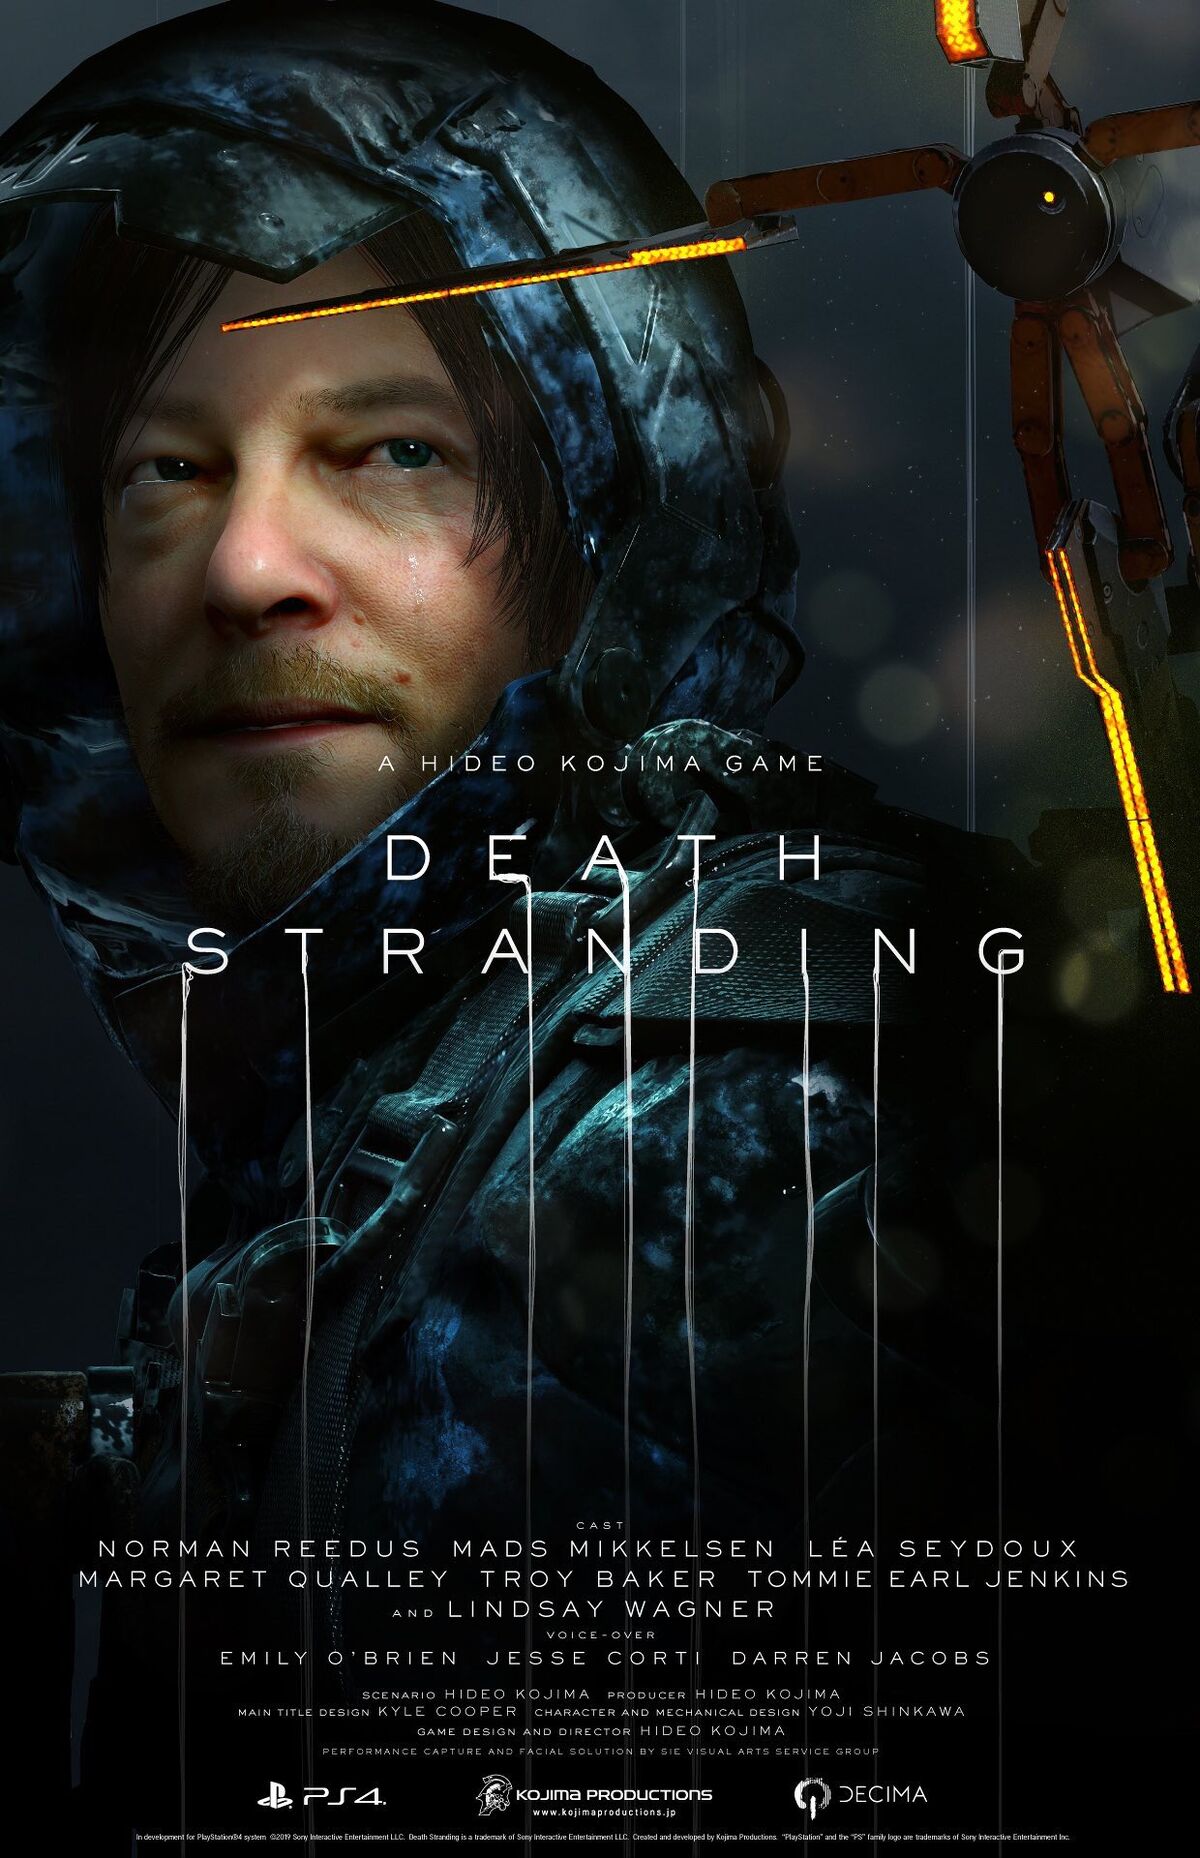 Troy Baker joins Death Stranding cast as the mysterious Man in the